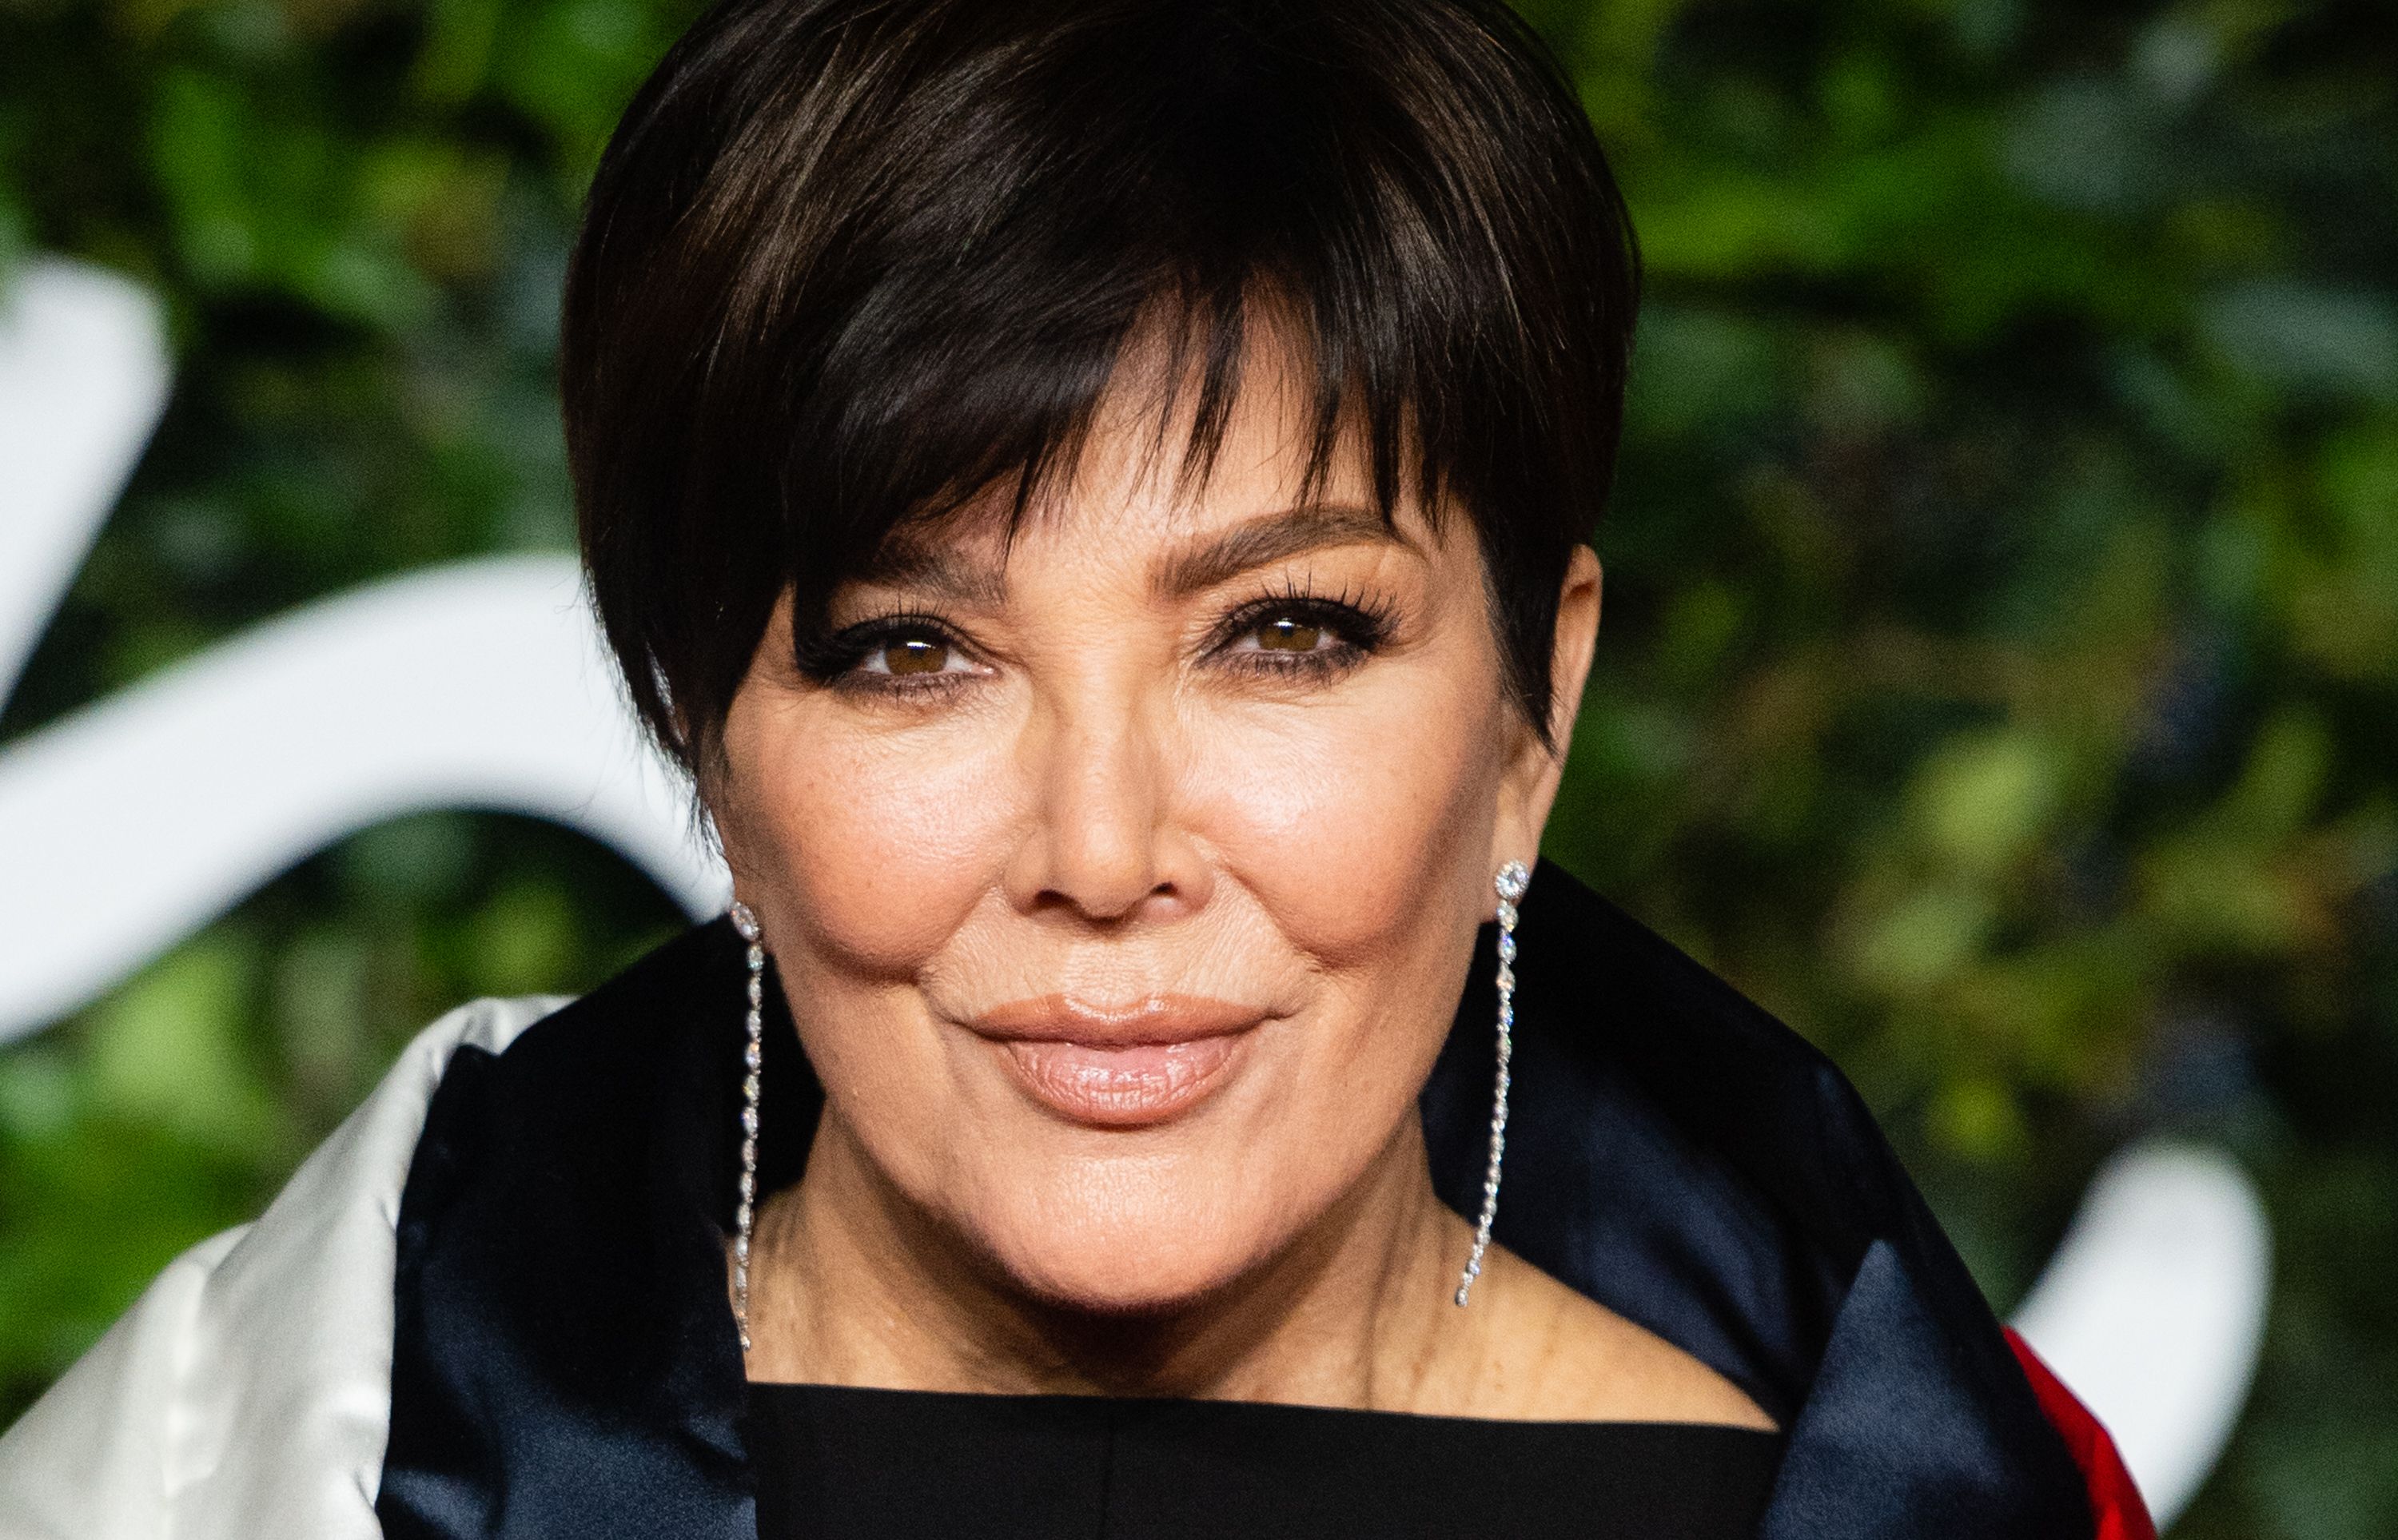 Kris Jenner Has a New Shoulder-Length Bob Hairstyle